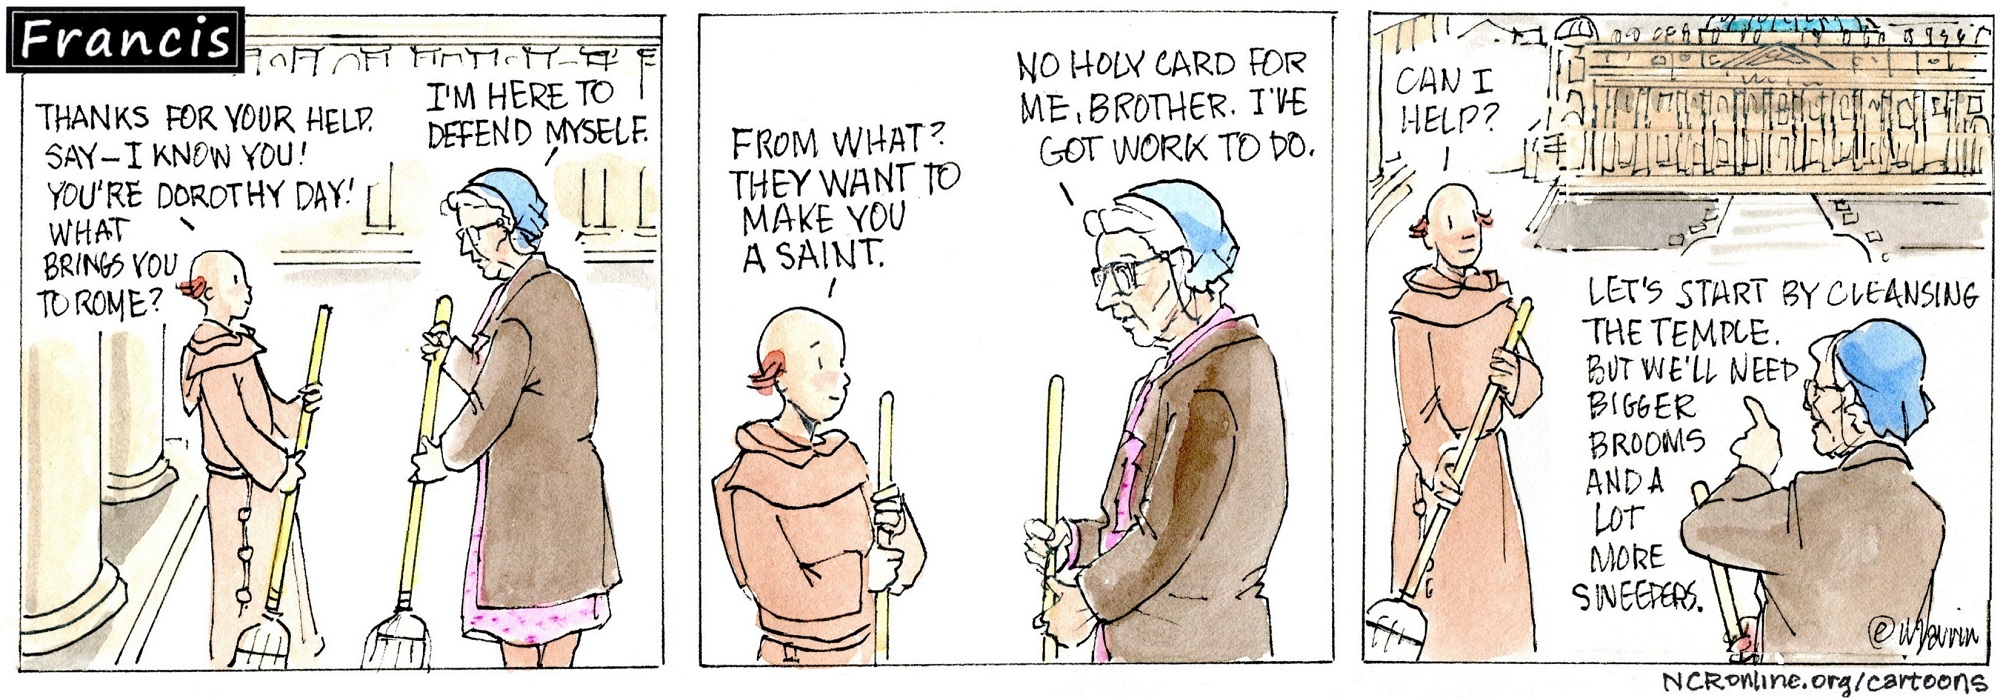 Francis, the comic strip: Brother Leo and Dorothy Day get to work cleansing the temple.